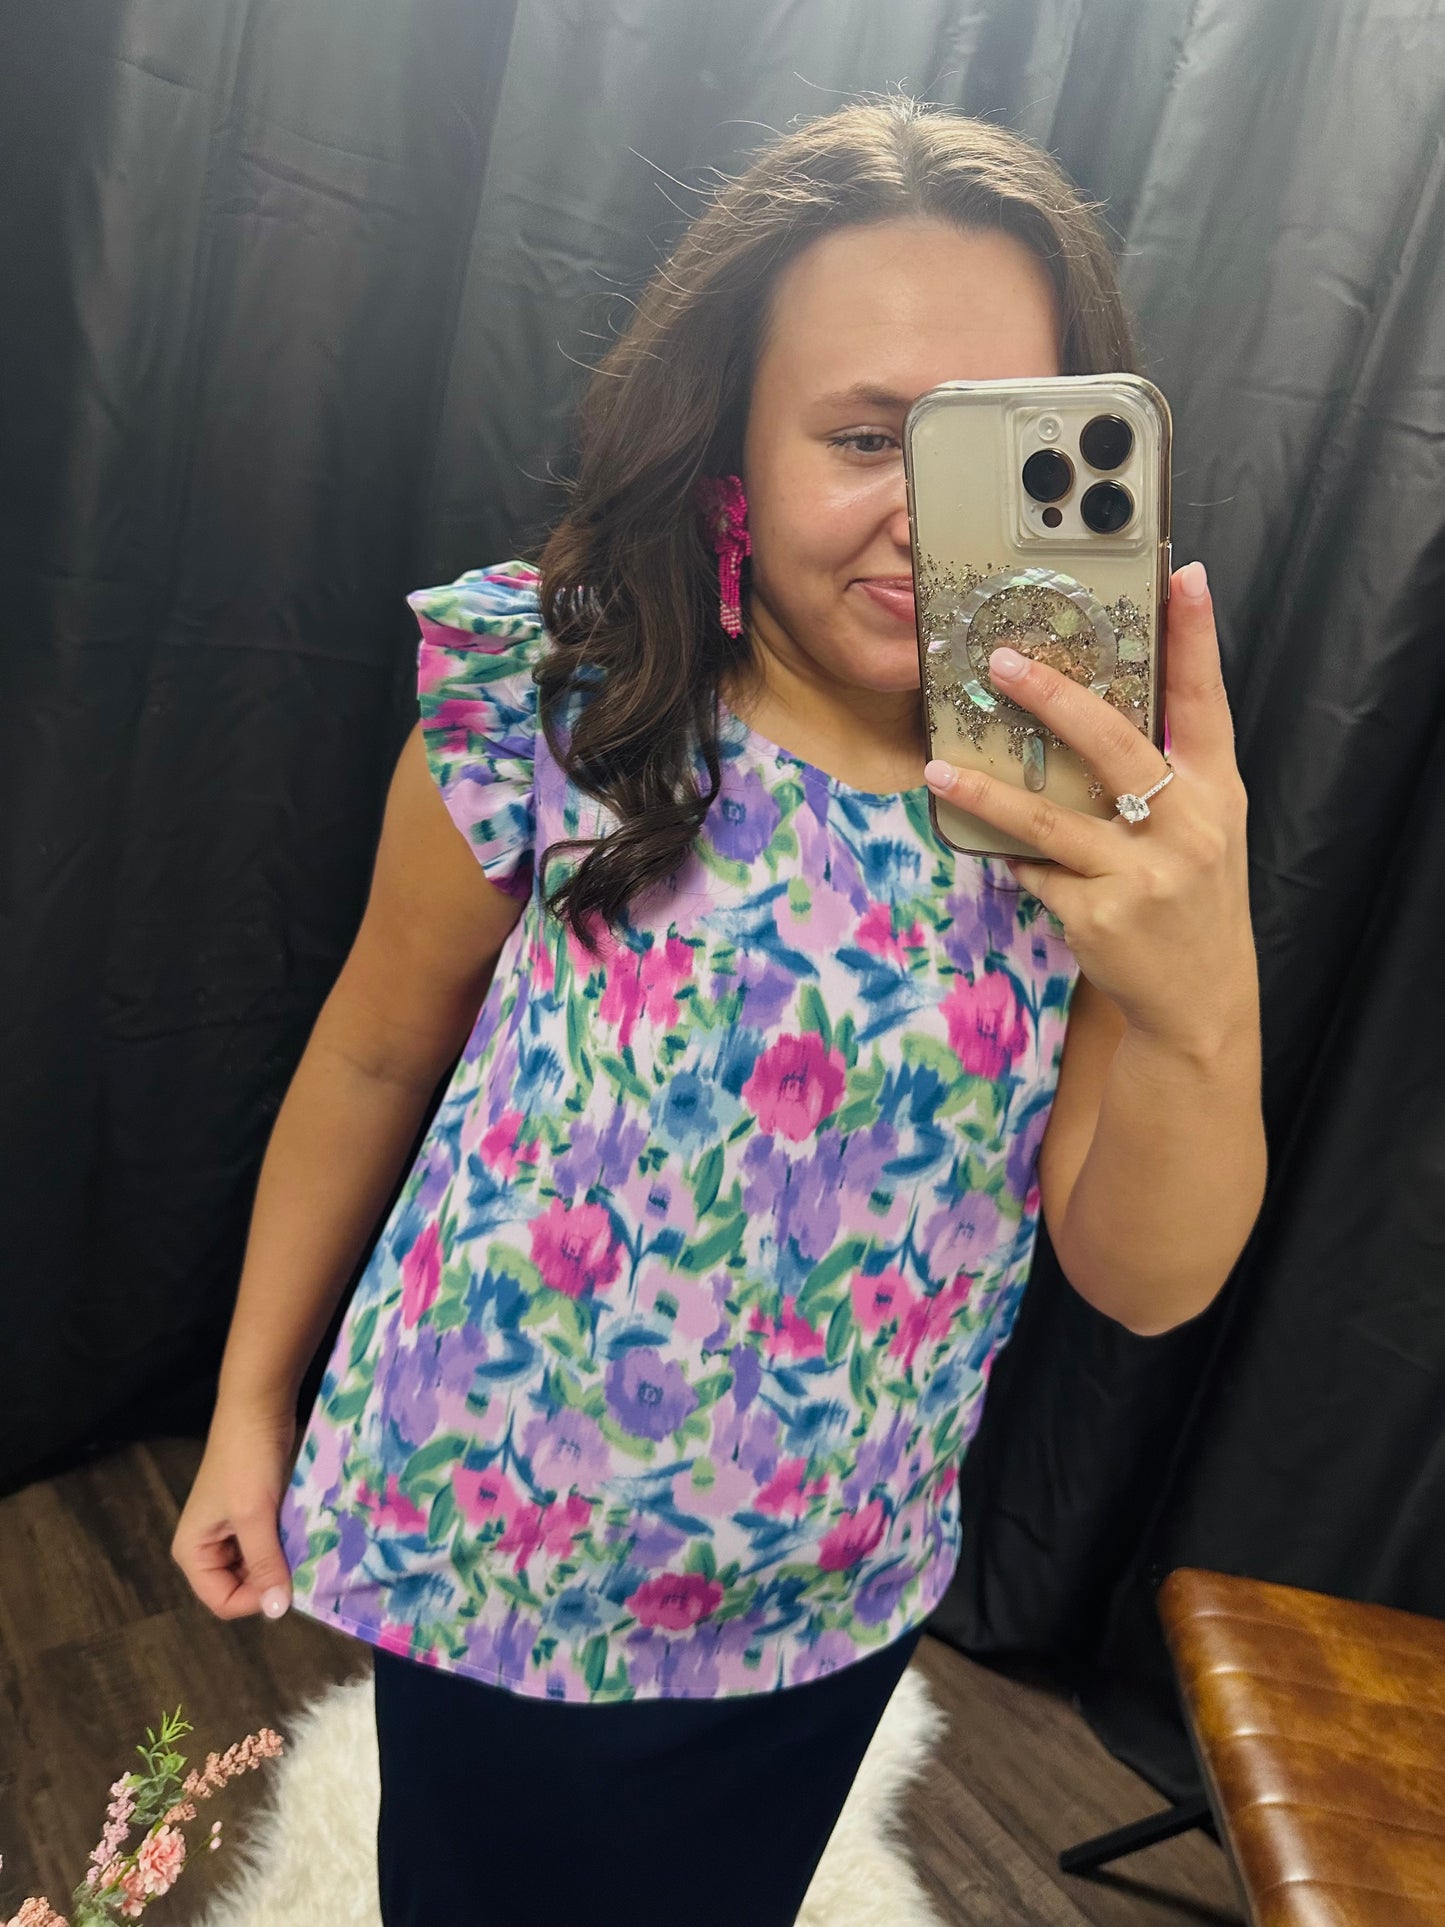 The Lilac Floral Print Top